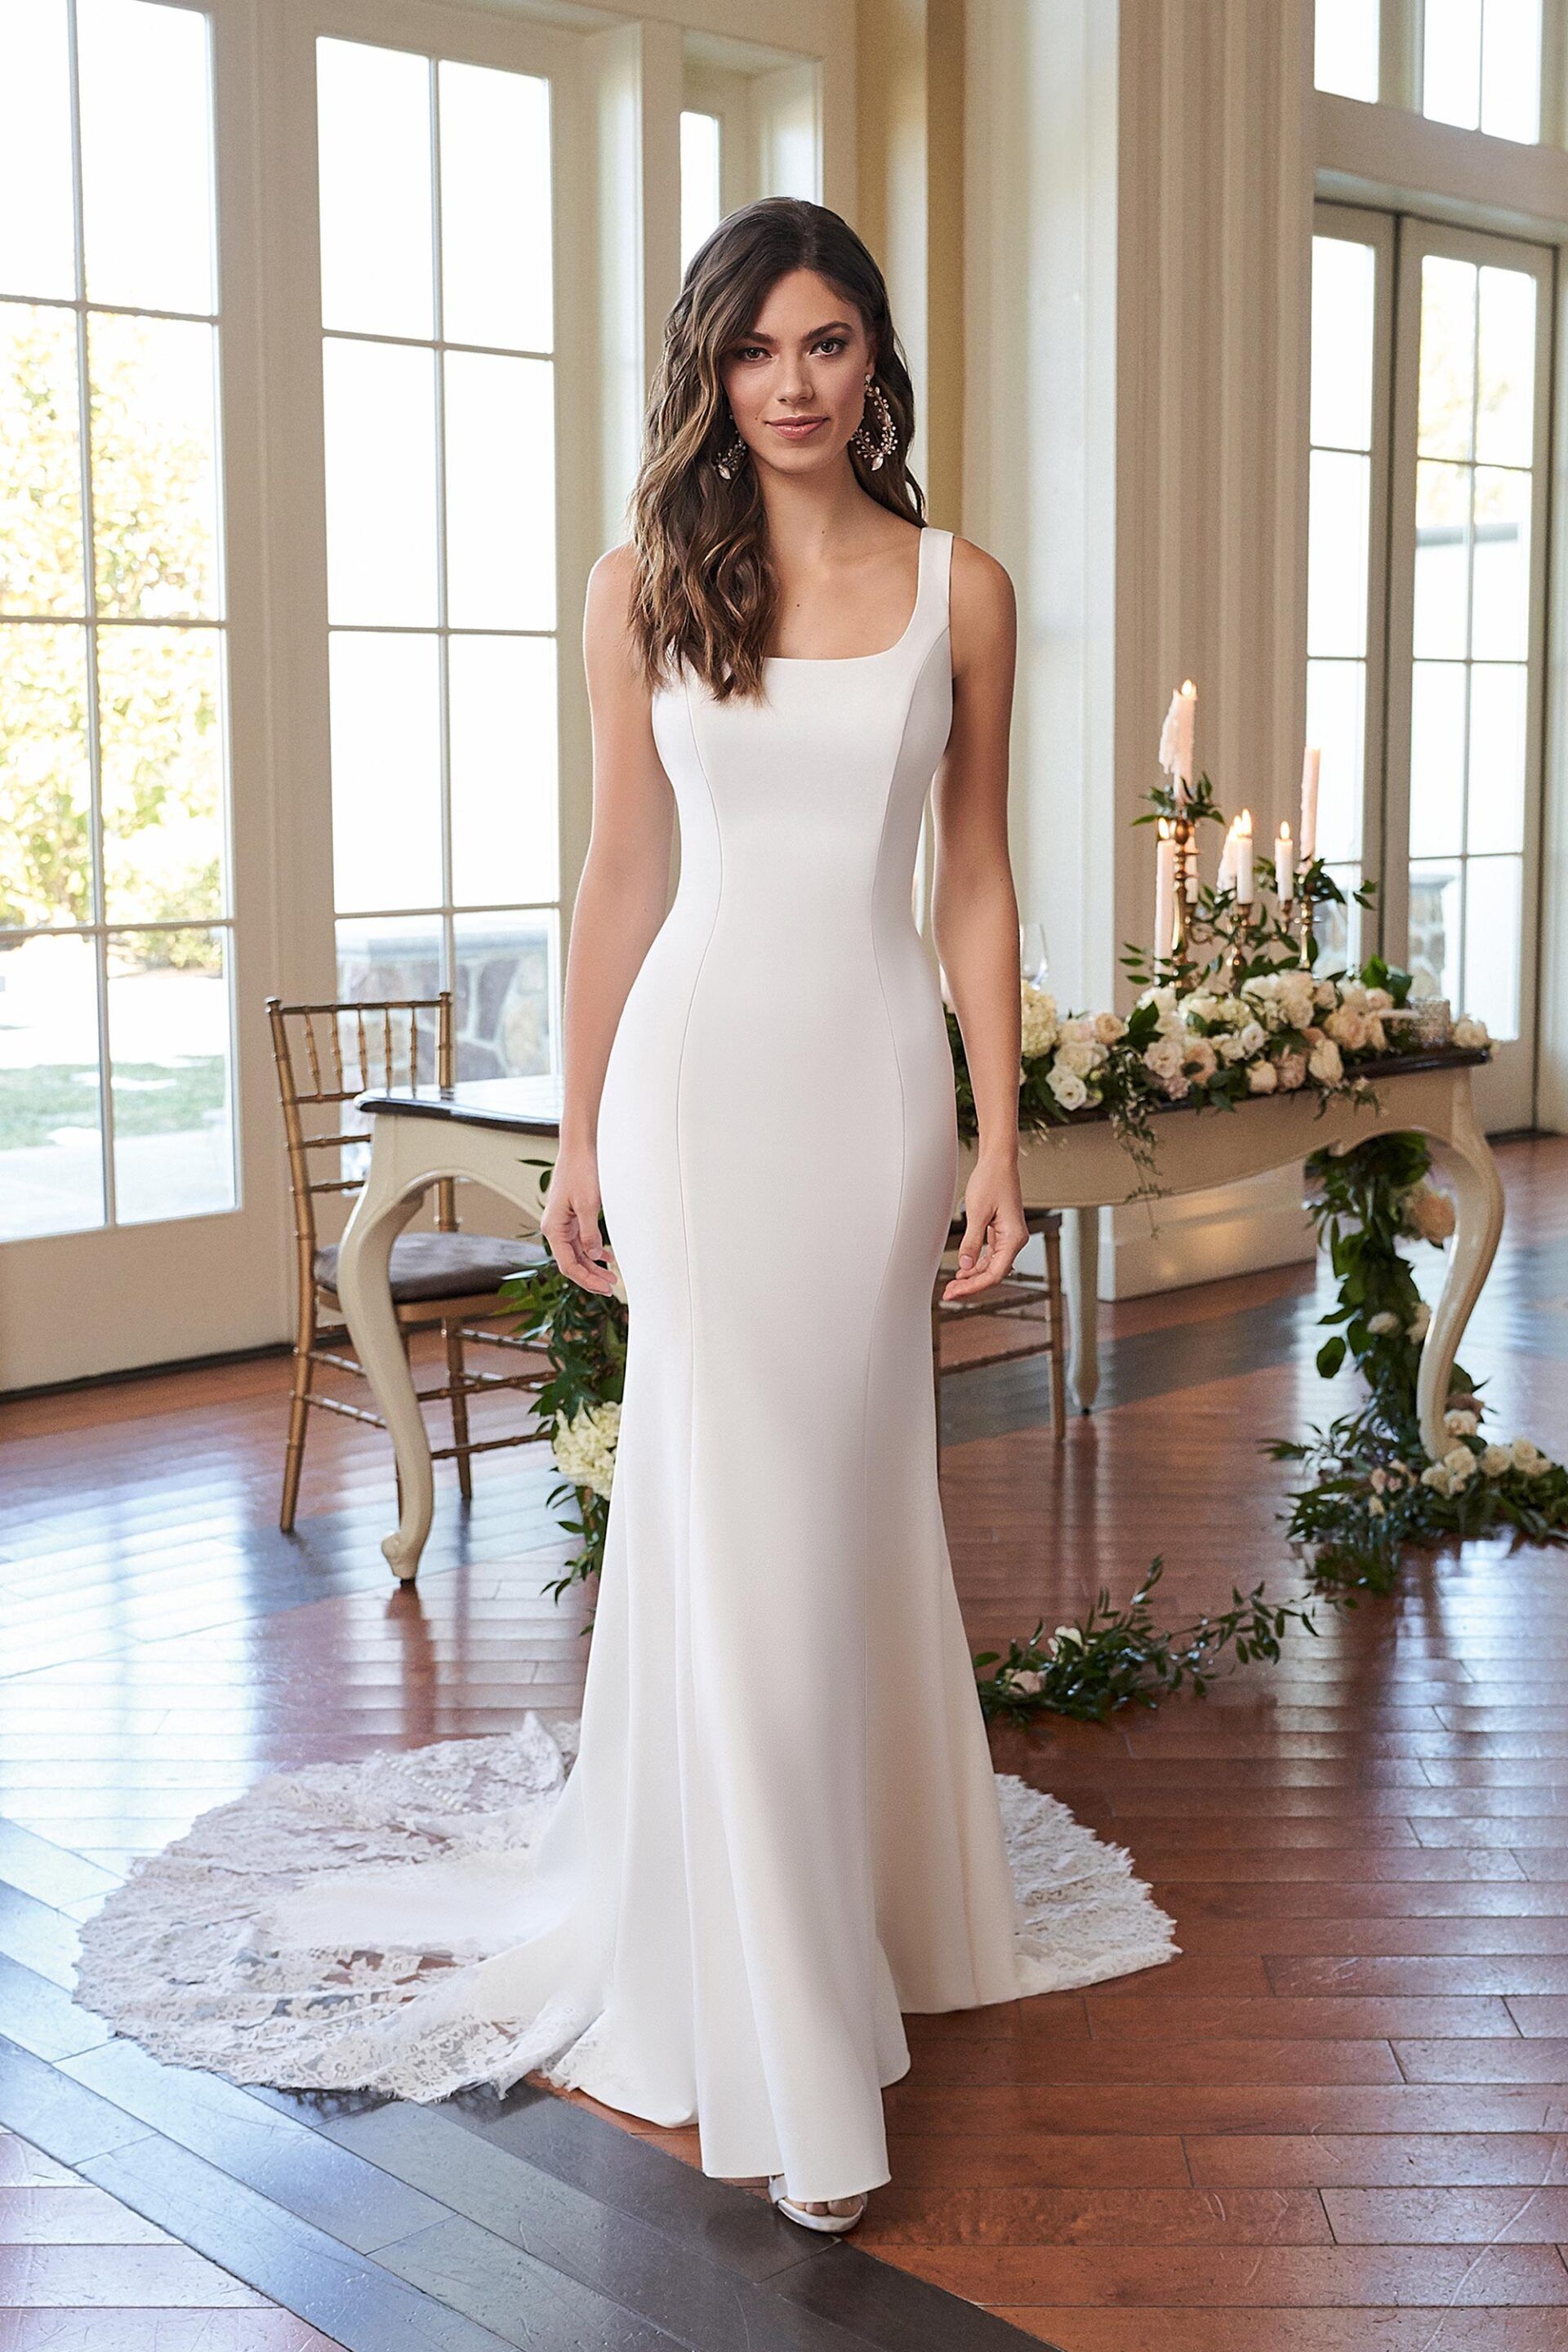 Top Wedding Dress Geneseo Ny of the decade The ultimate guide 